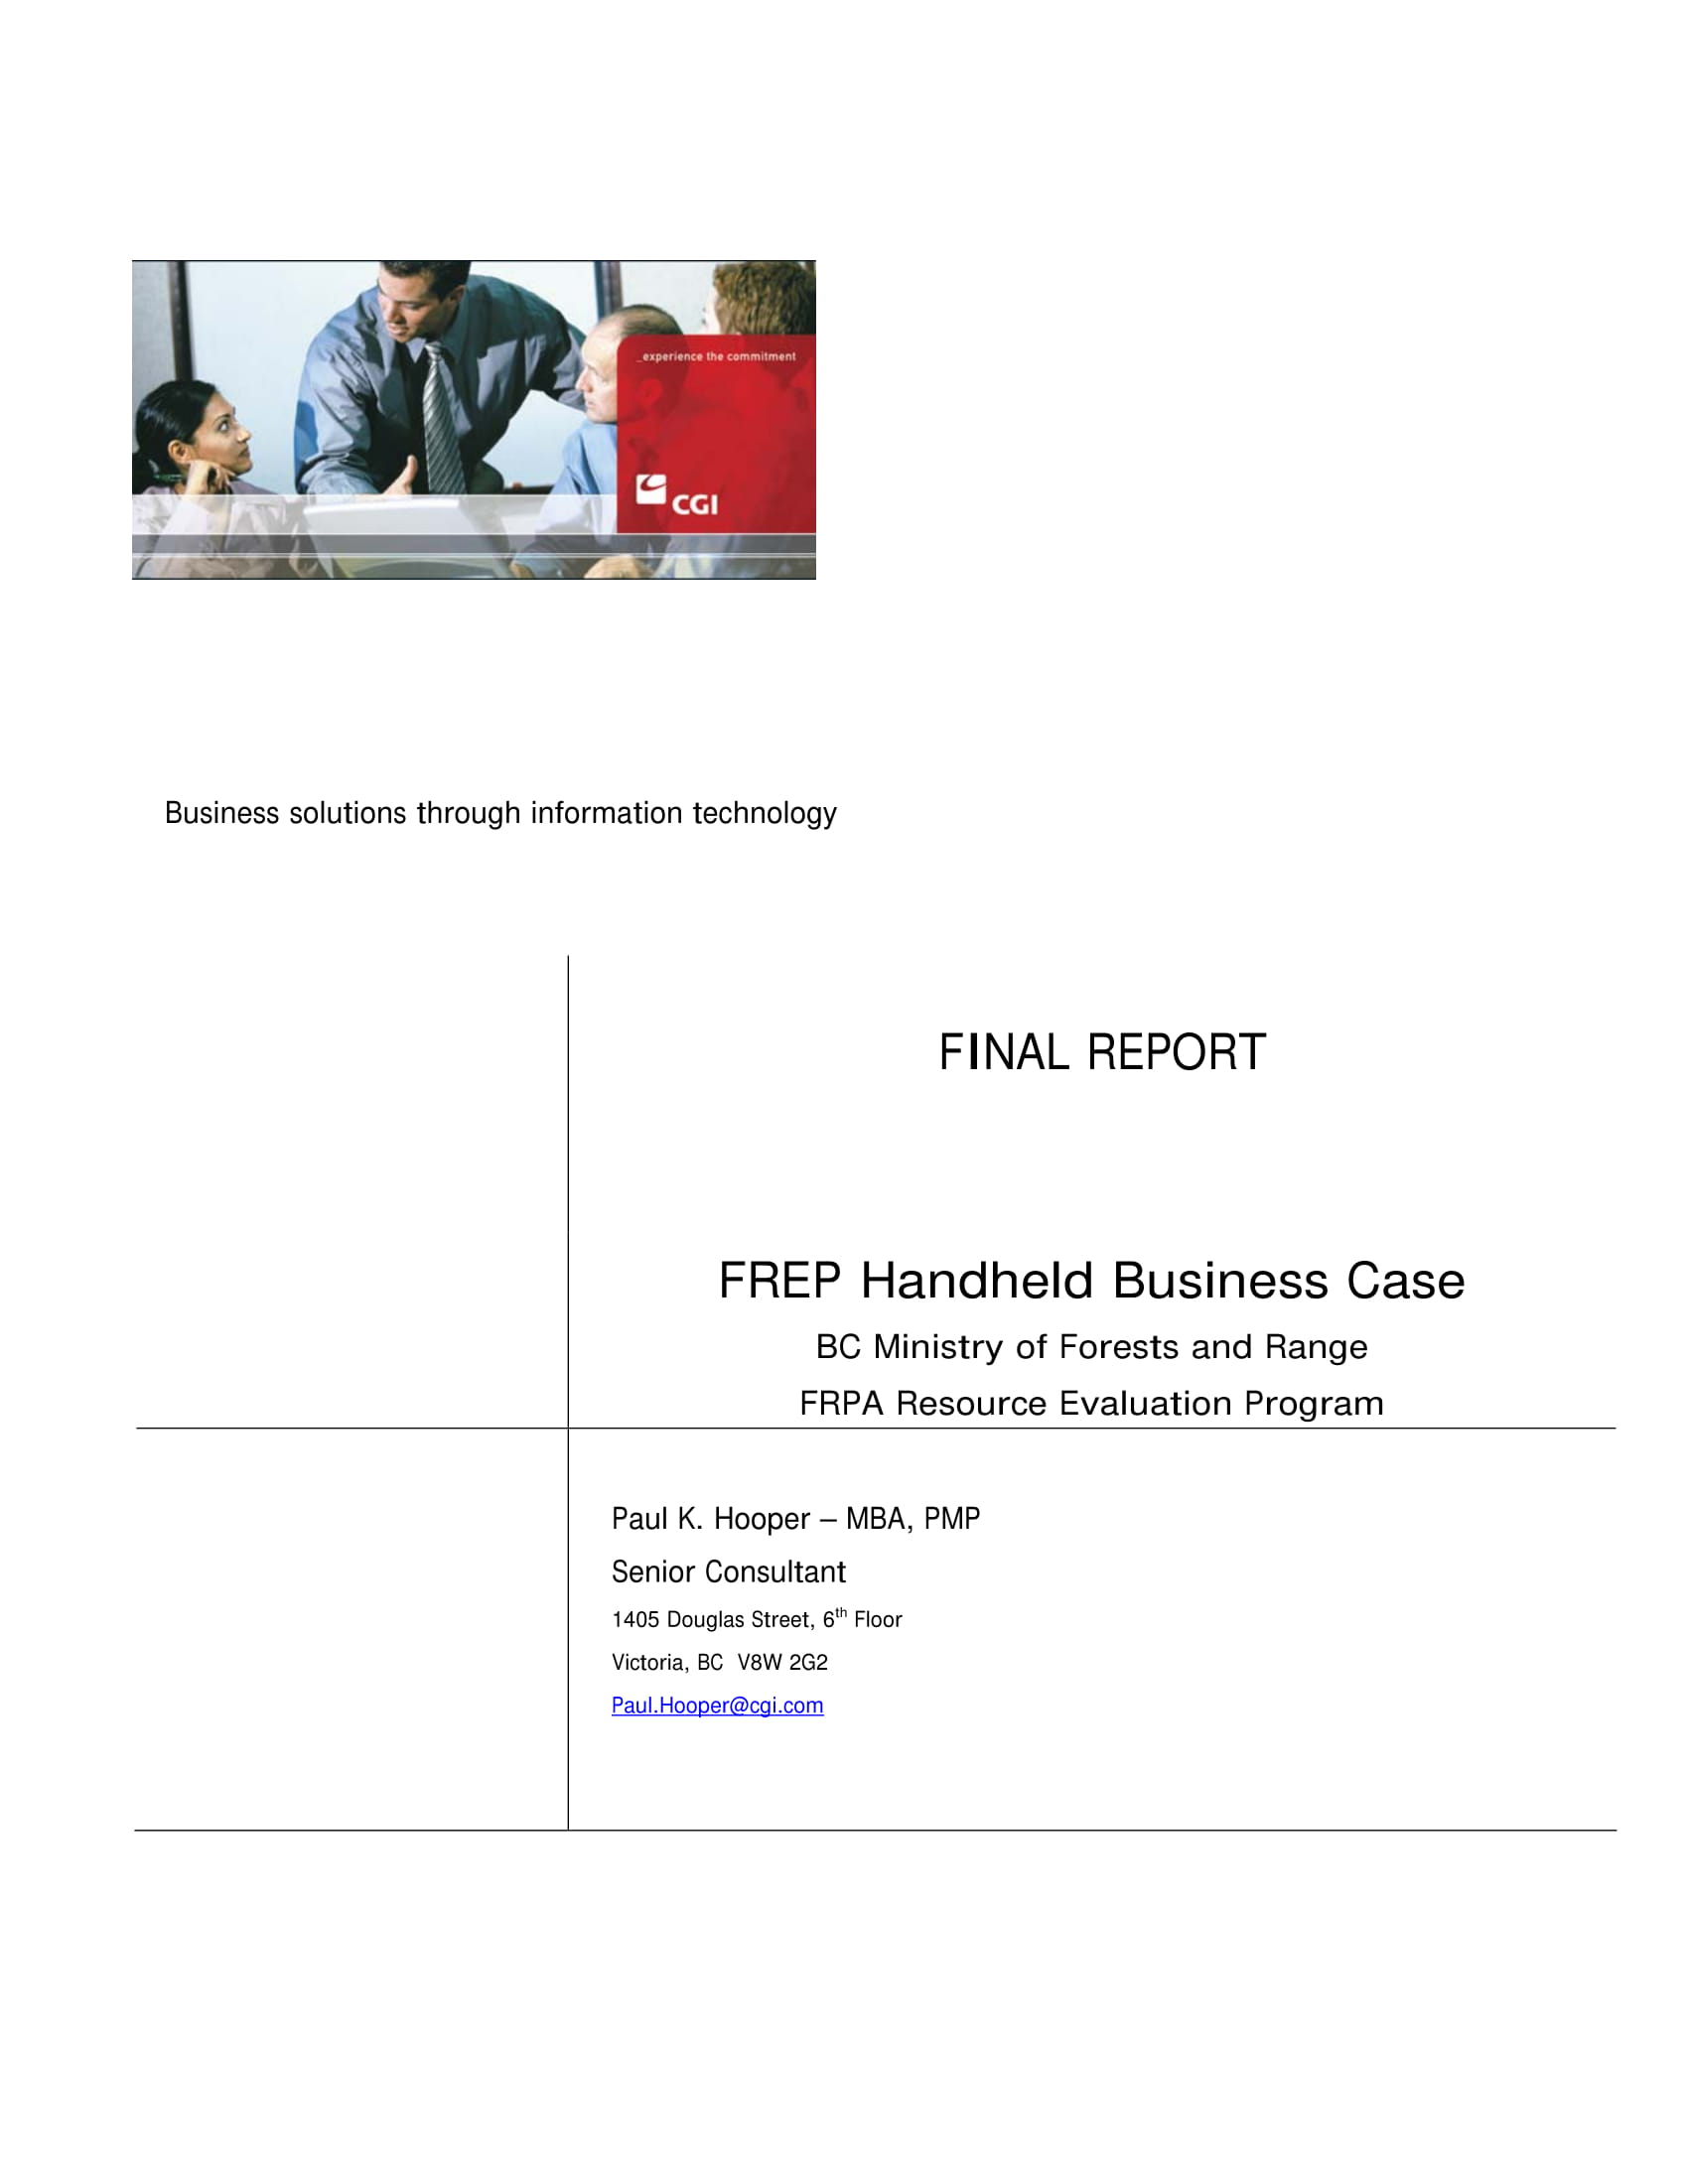 business case evaluation example 01